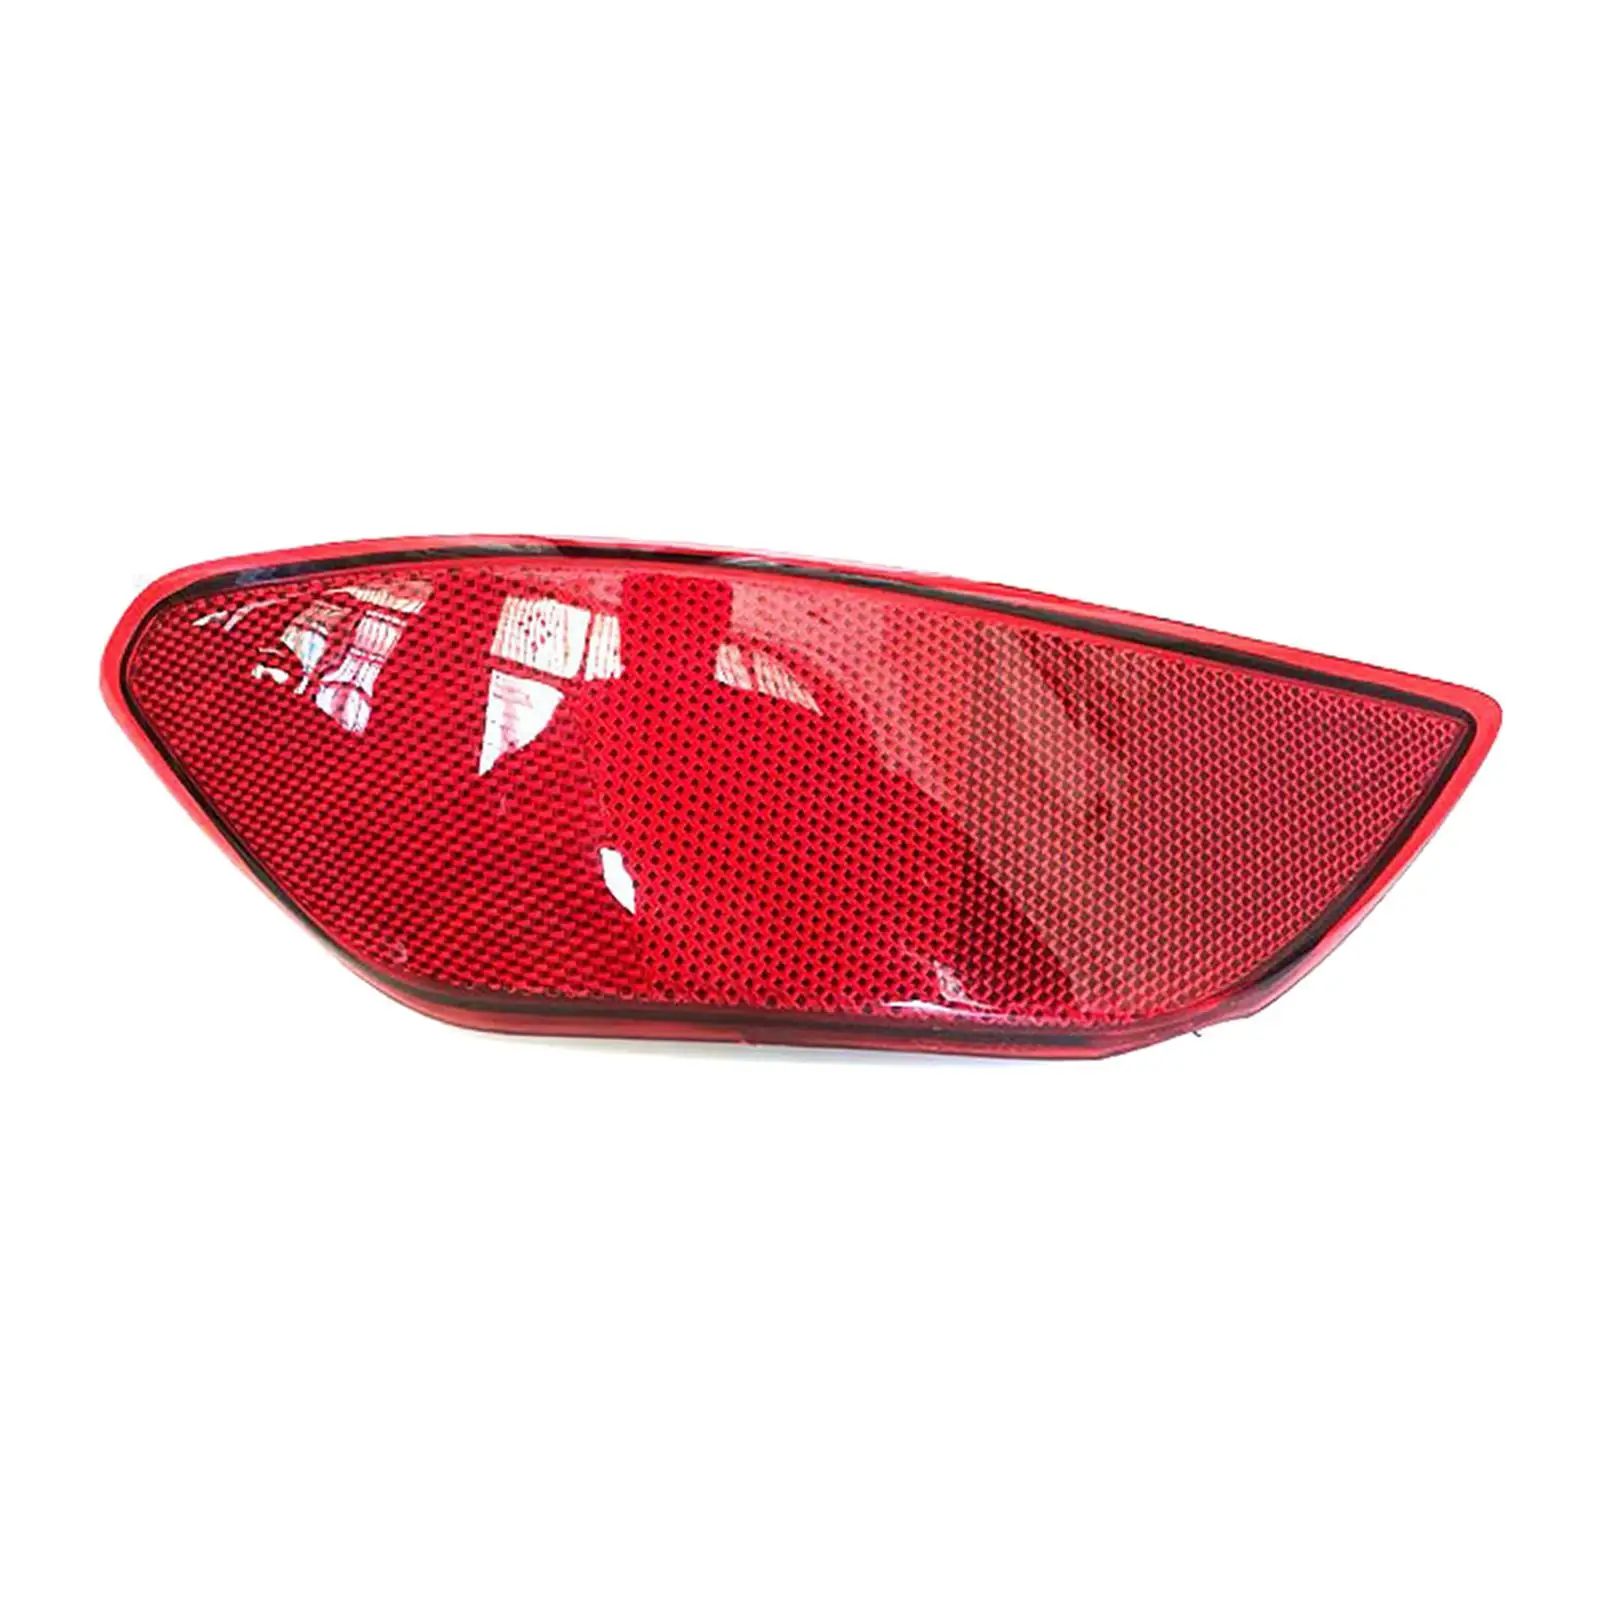 Rear Reflector for Car Rear Reflector Light Lamp Replacement Replaces